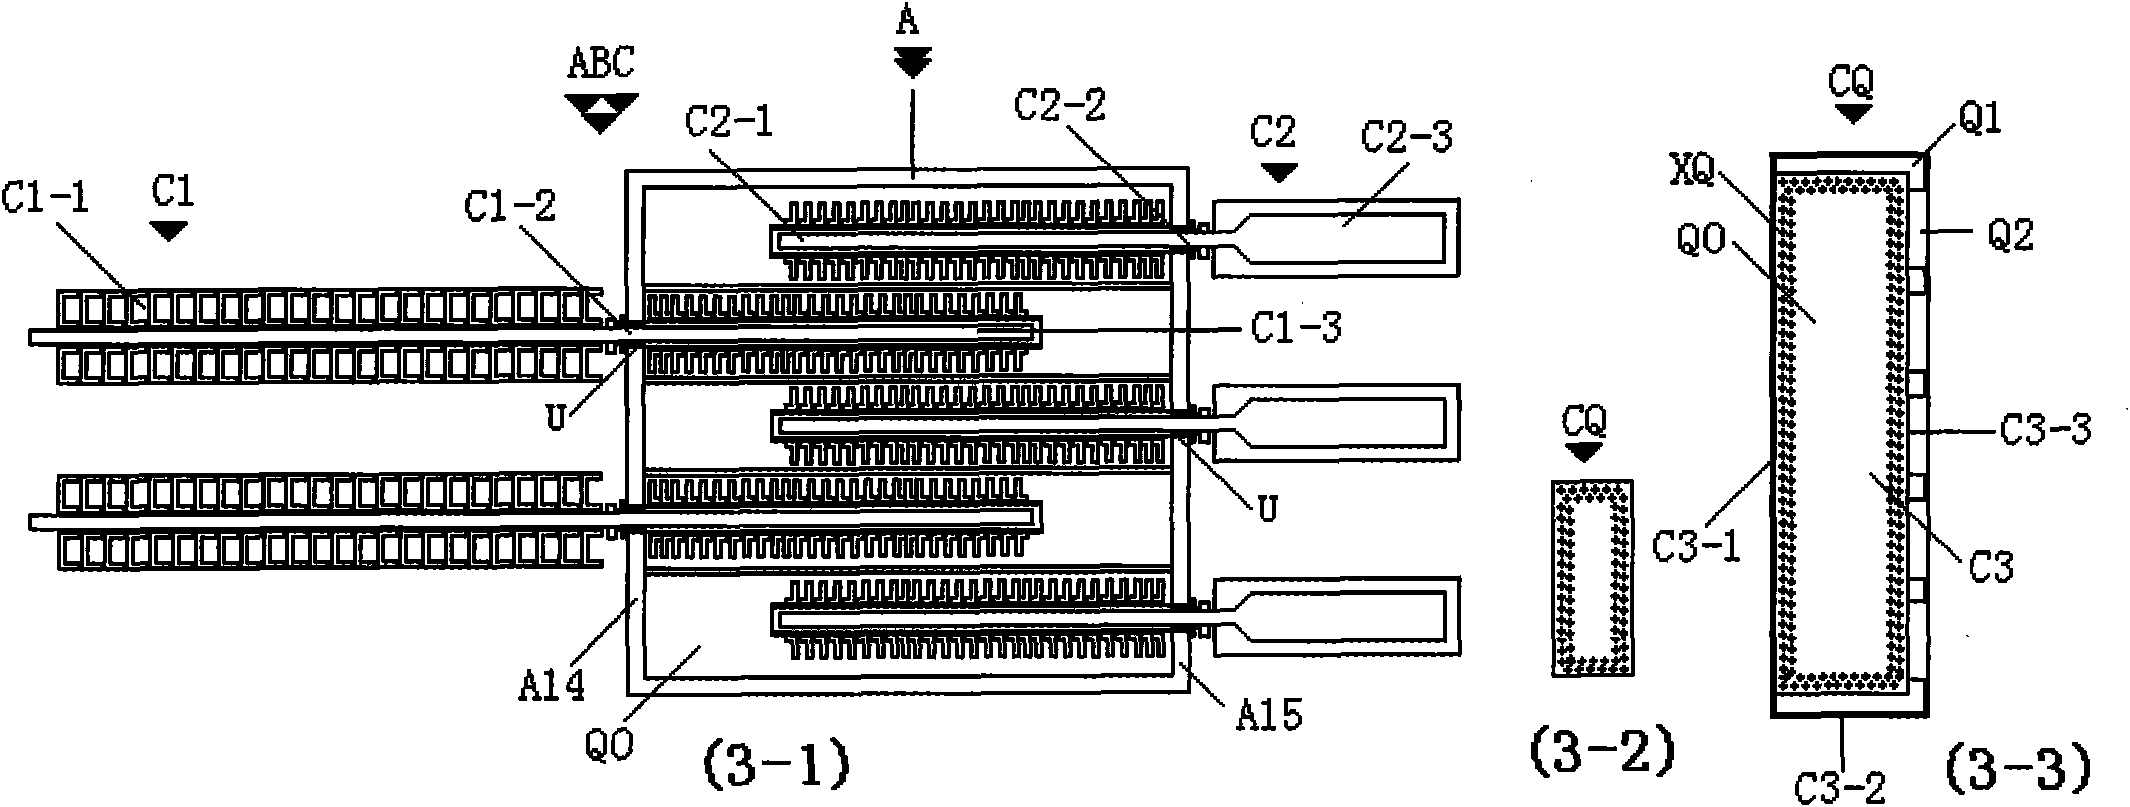 Electric locomotive device system for generating and charging by vacuum energy